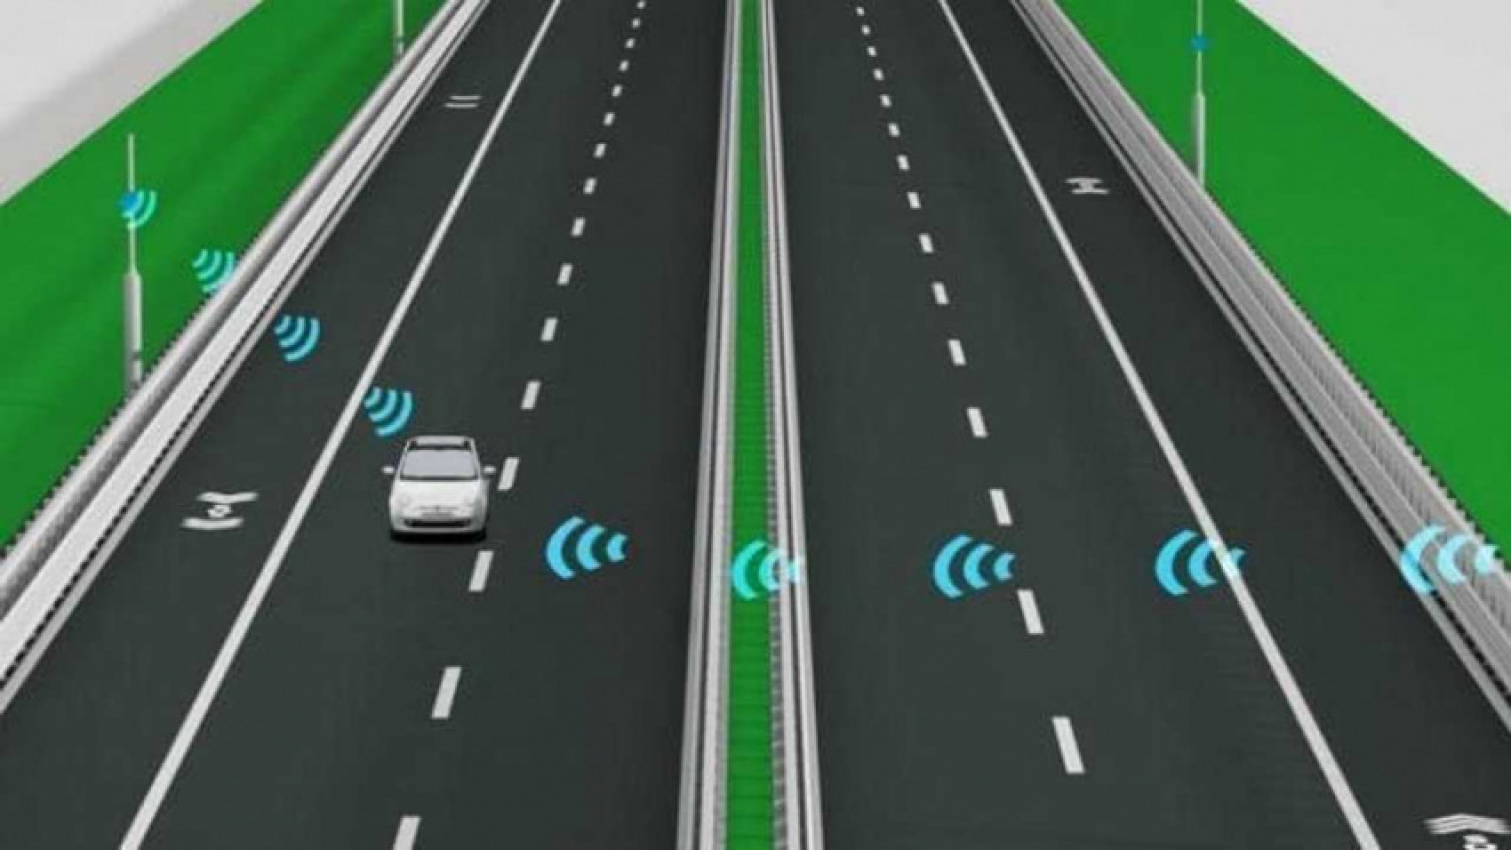 autos, cars, smart, salerno-reggio calabria in italy set to be europe’s longest smart road